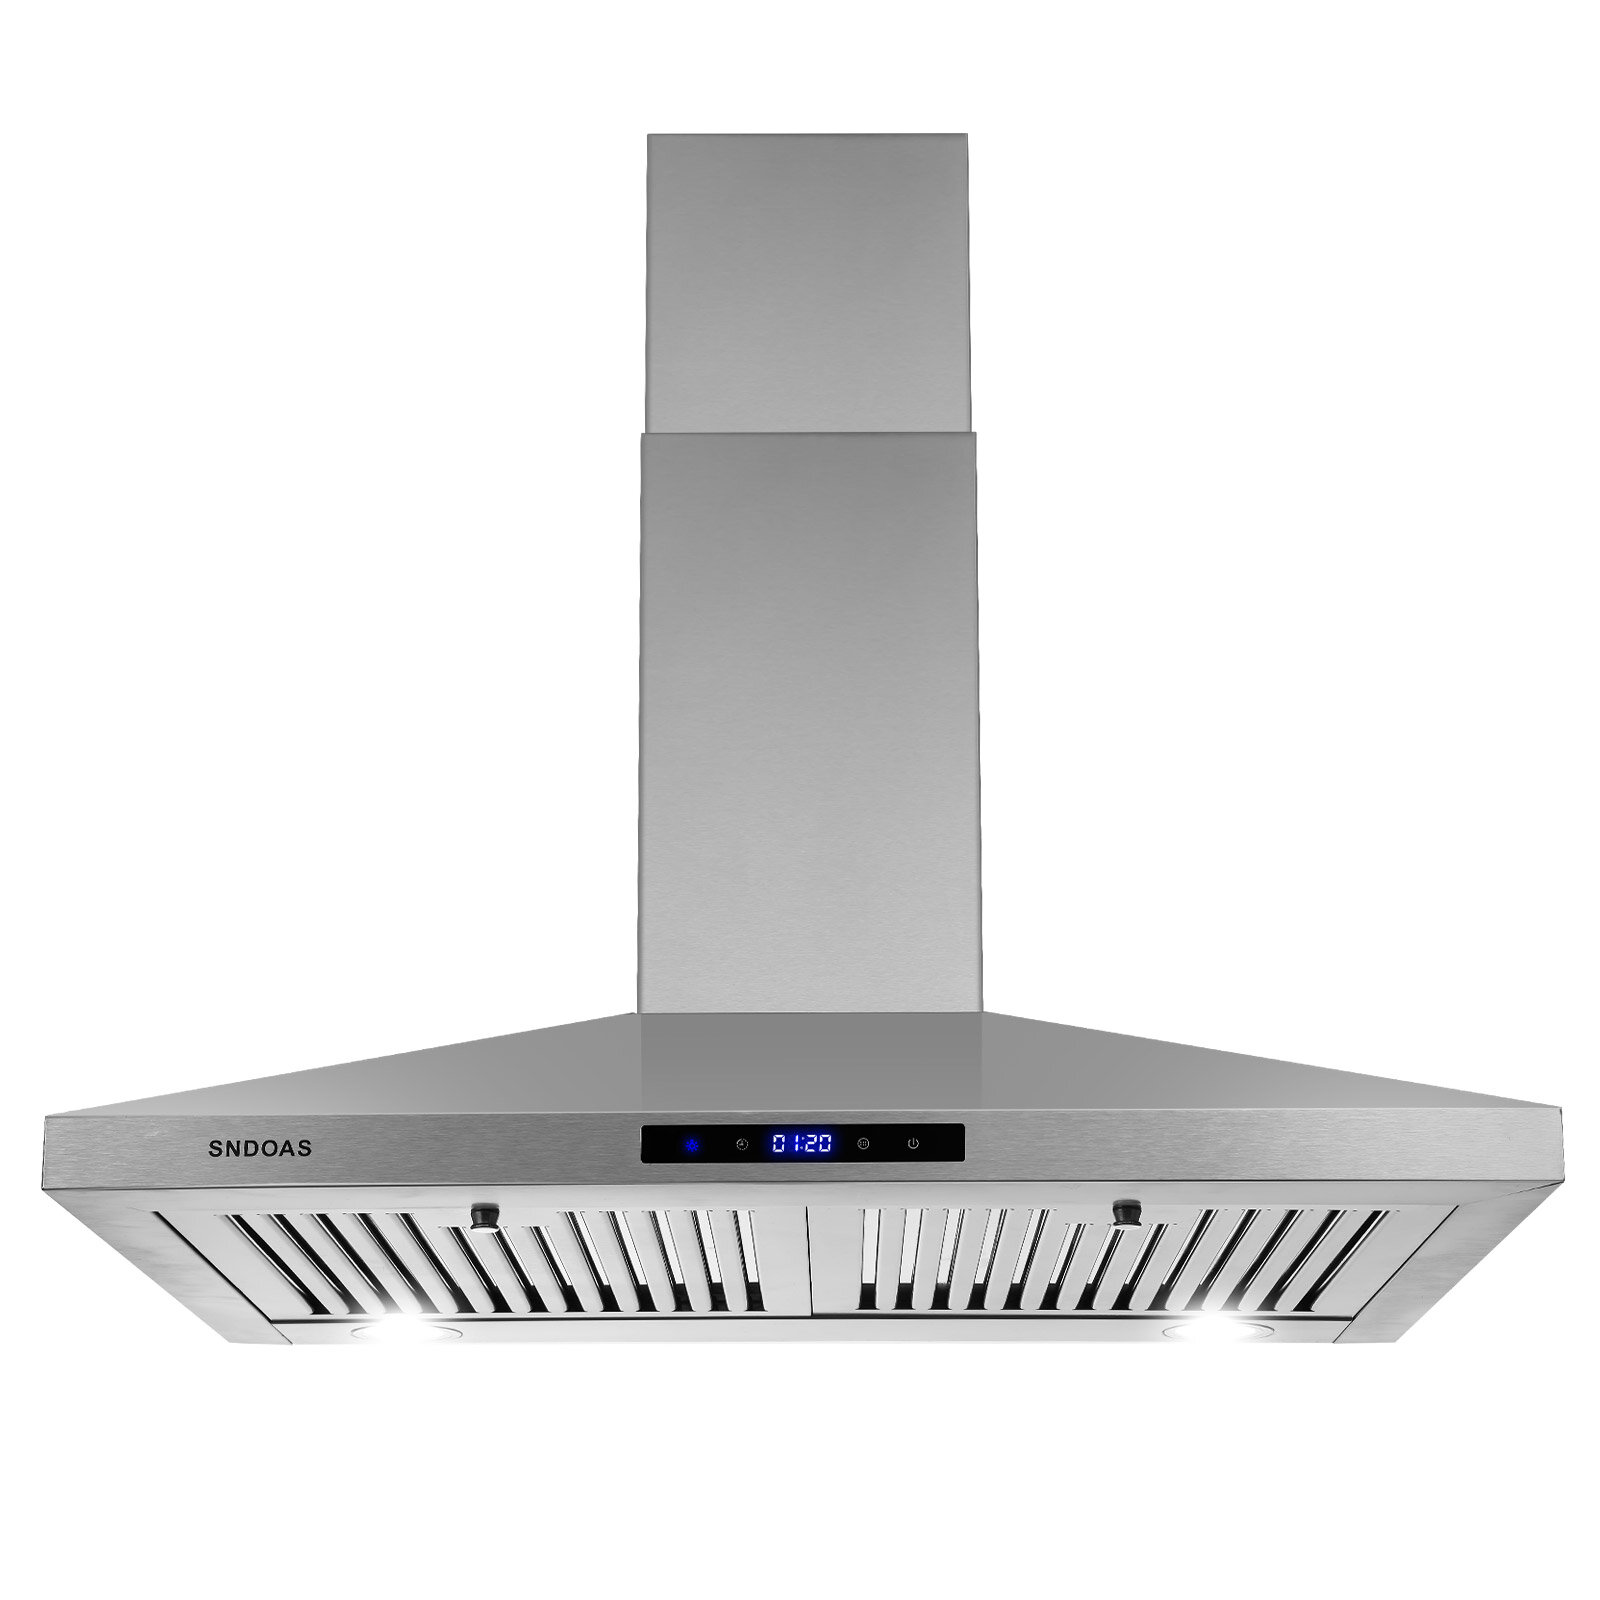 BWS2 Series 30'' W Convertible Wall Mount Low Profile Pyramidal Chimney Range  Hood, 450 CFM, 3.0 Sones, Black Stainless Steel or Stainless Steel Finish  by Broan